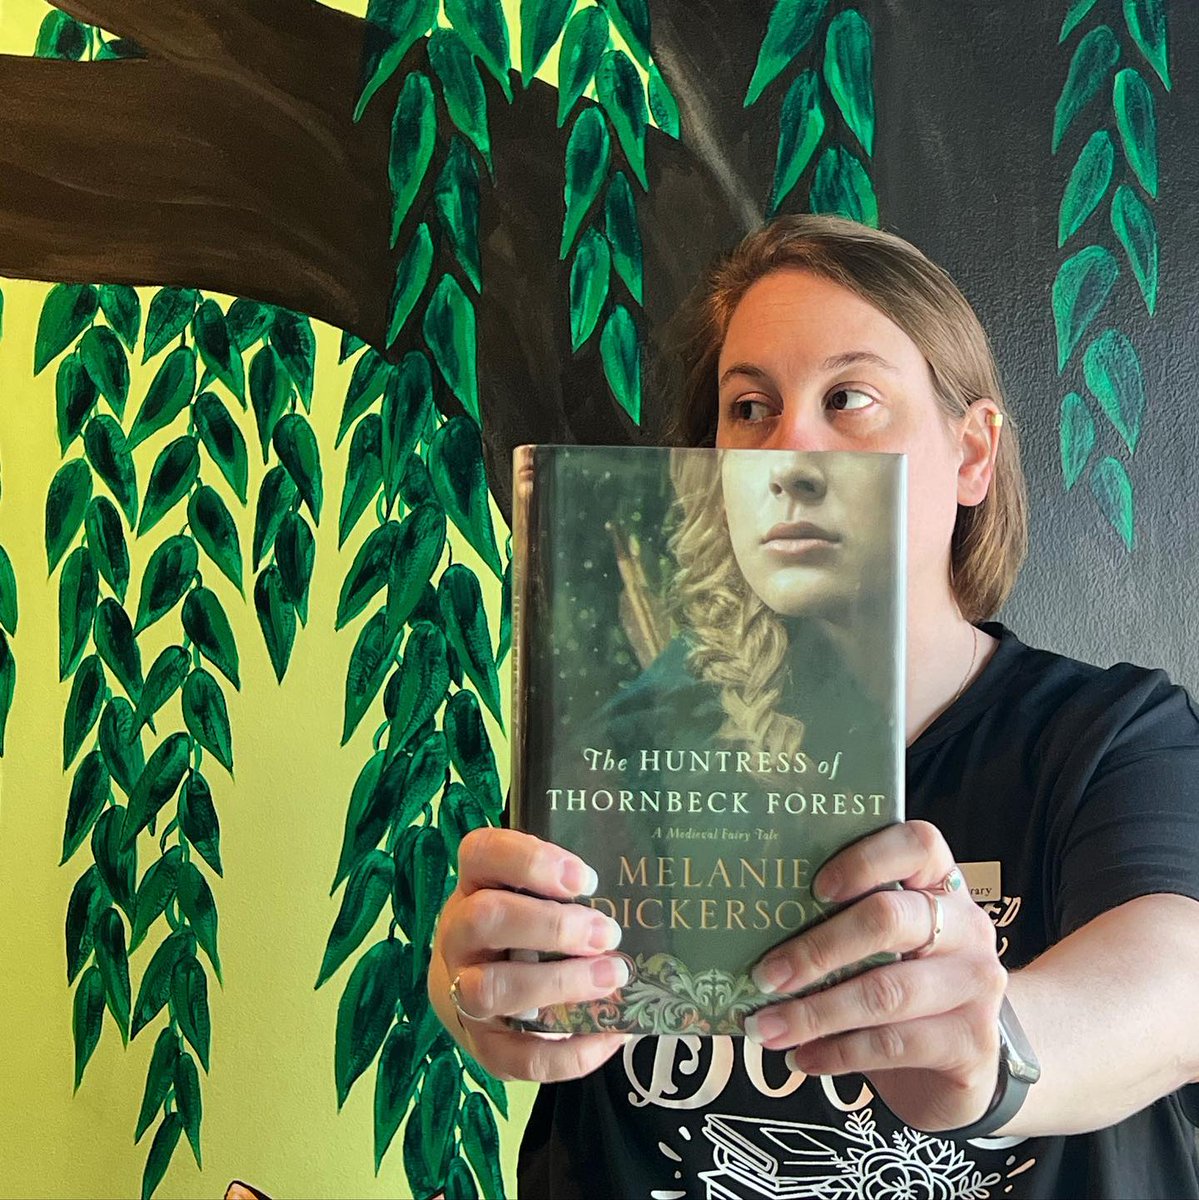 Happy Friday friends! Alexa is living out her forest fantasy dreams for this week’s #BookFaceFriday.